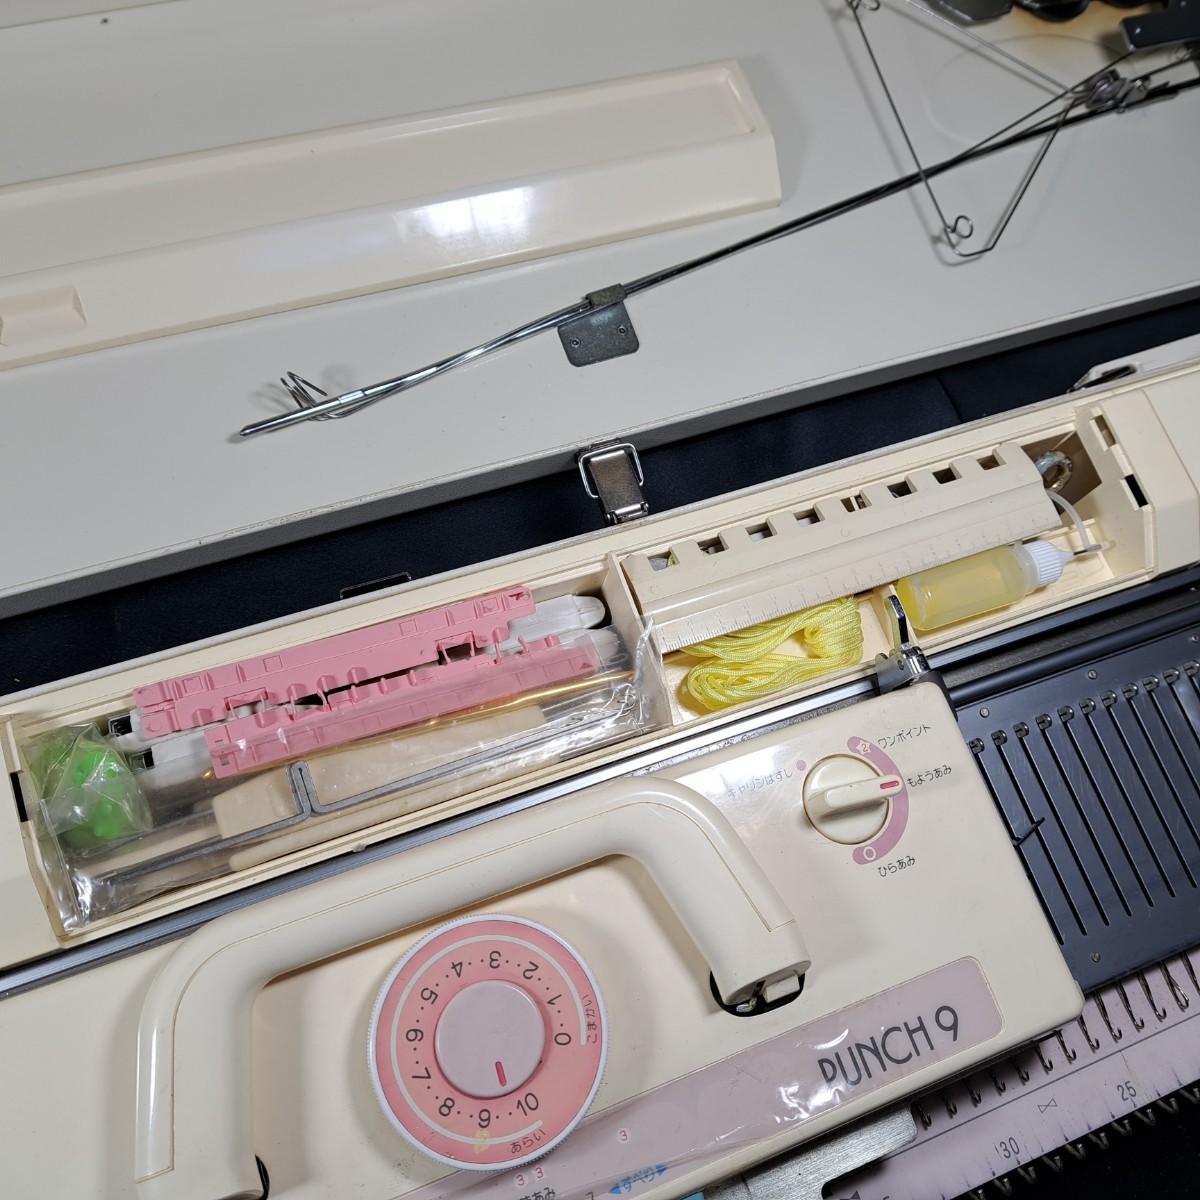  knitter, compilation machine, Brother knitter, Brother compilation machine 9.( futoshi machine ) punch na in (9)KH-260! service completed, selection needle excellent, accessory relation lack of less!